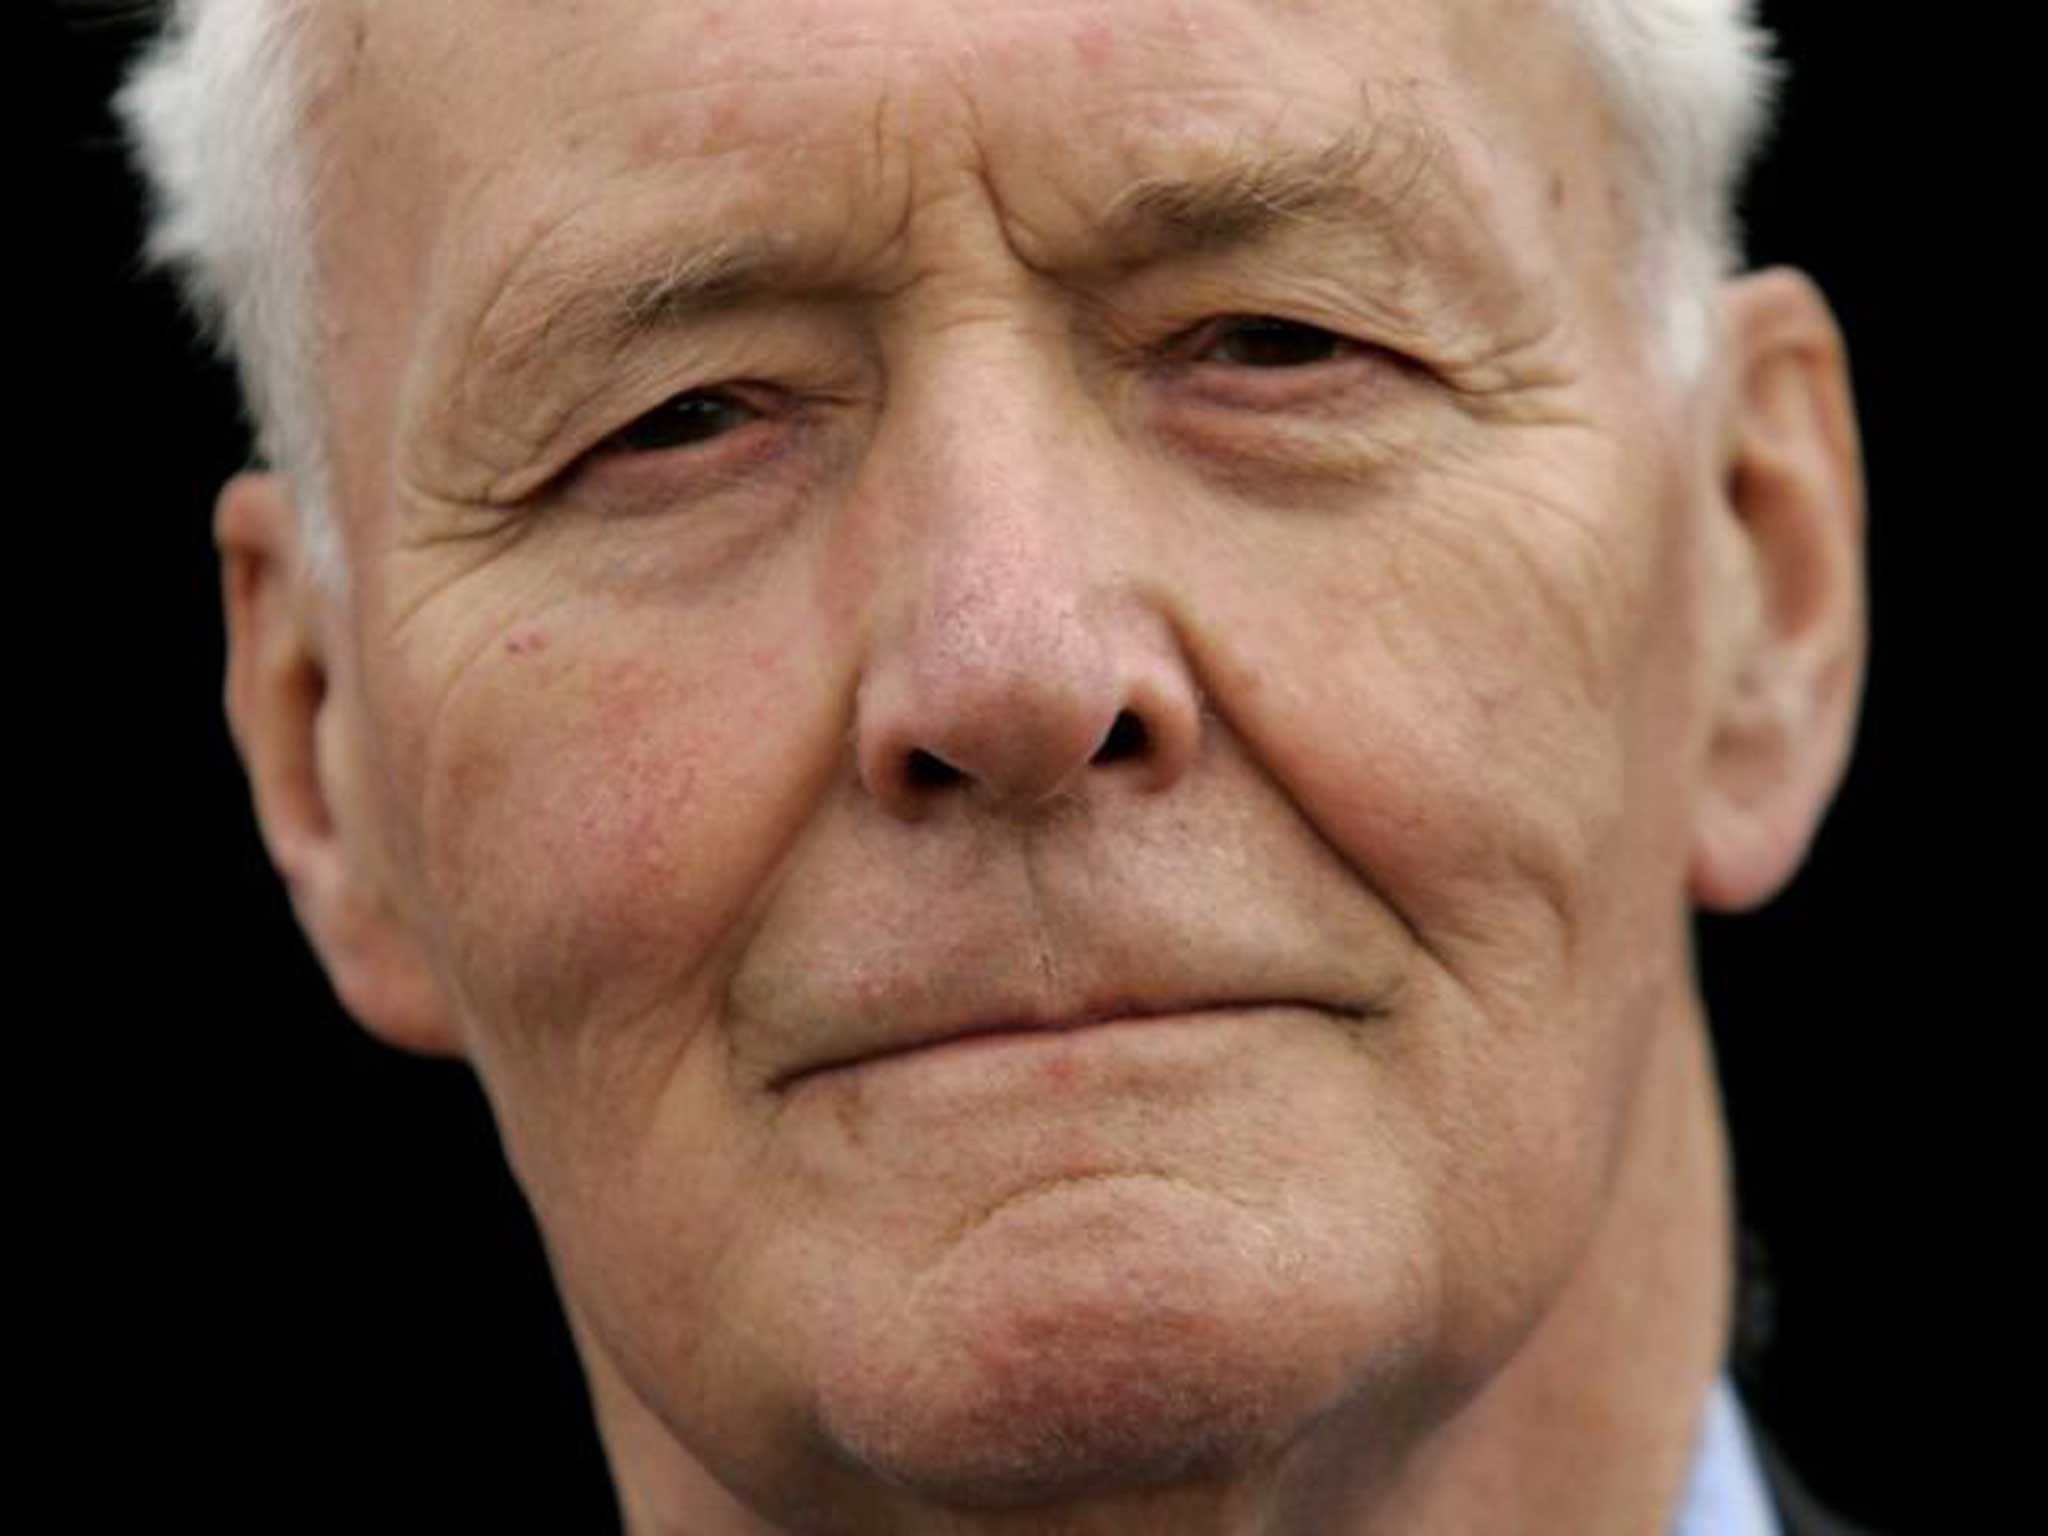 In death Tony Benn is likely to become only the second politician – after Margaret Thatcher - to rest overnight in a Westminster chapel on the night before his funeral, if a request to Buckingham Palace is granted.